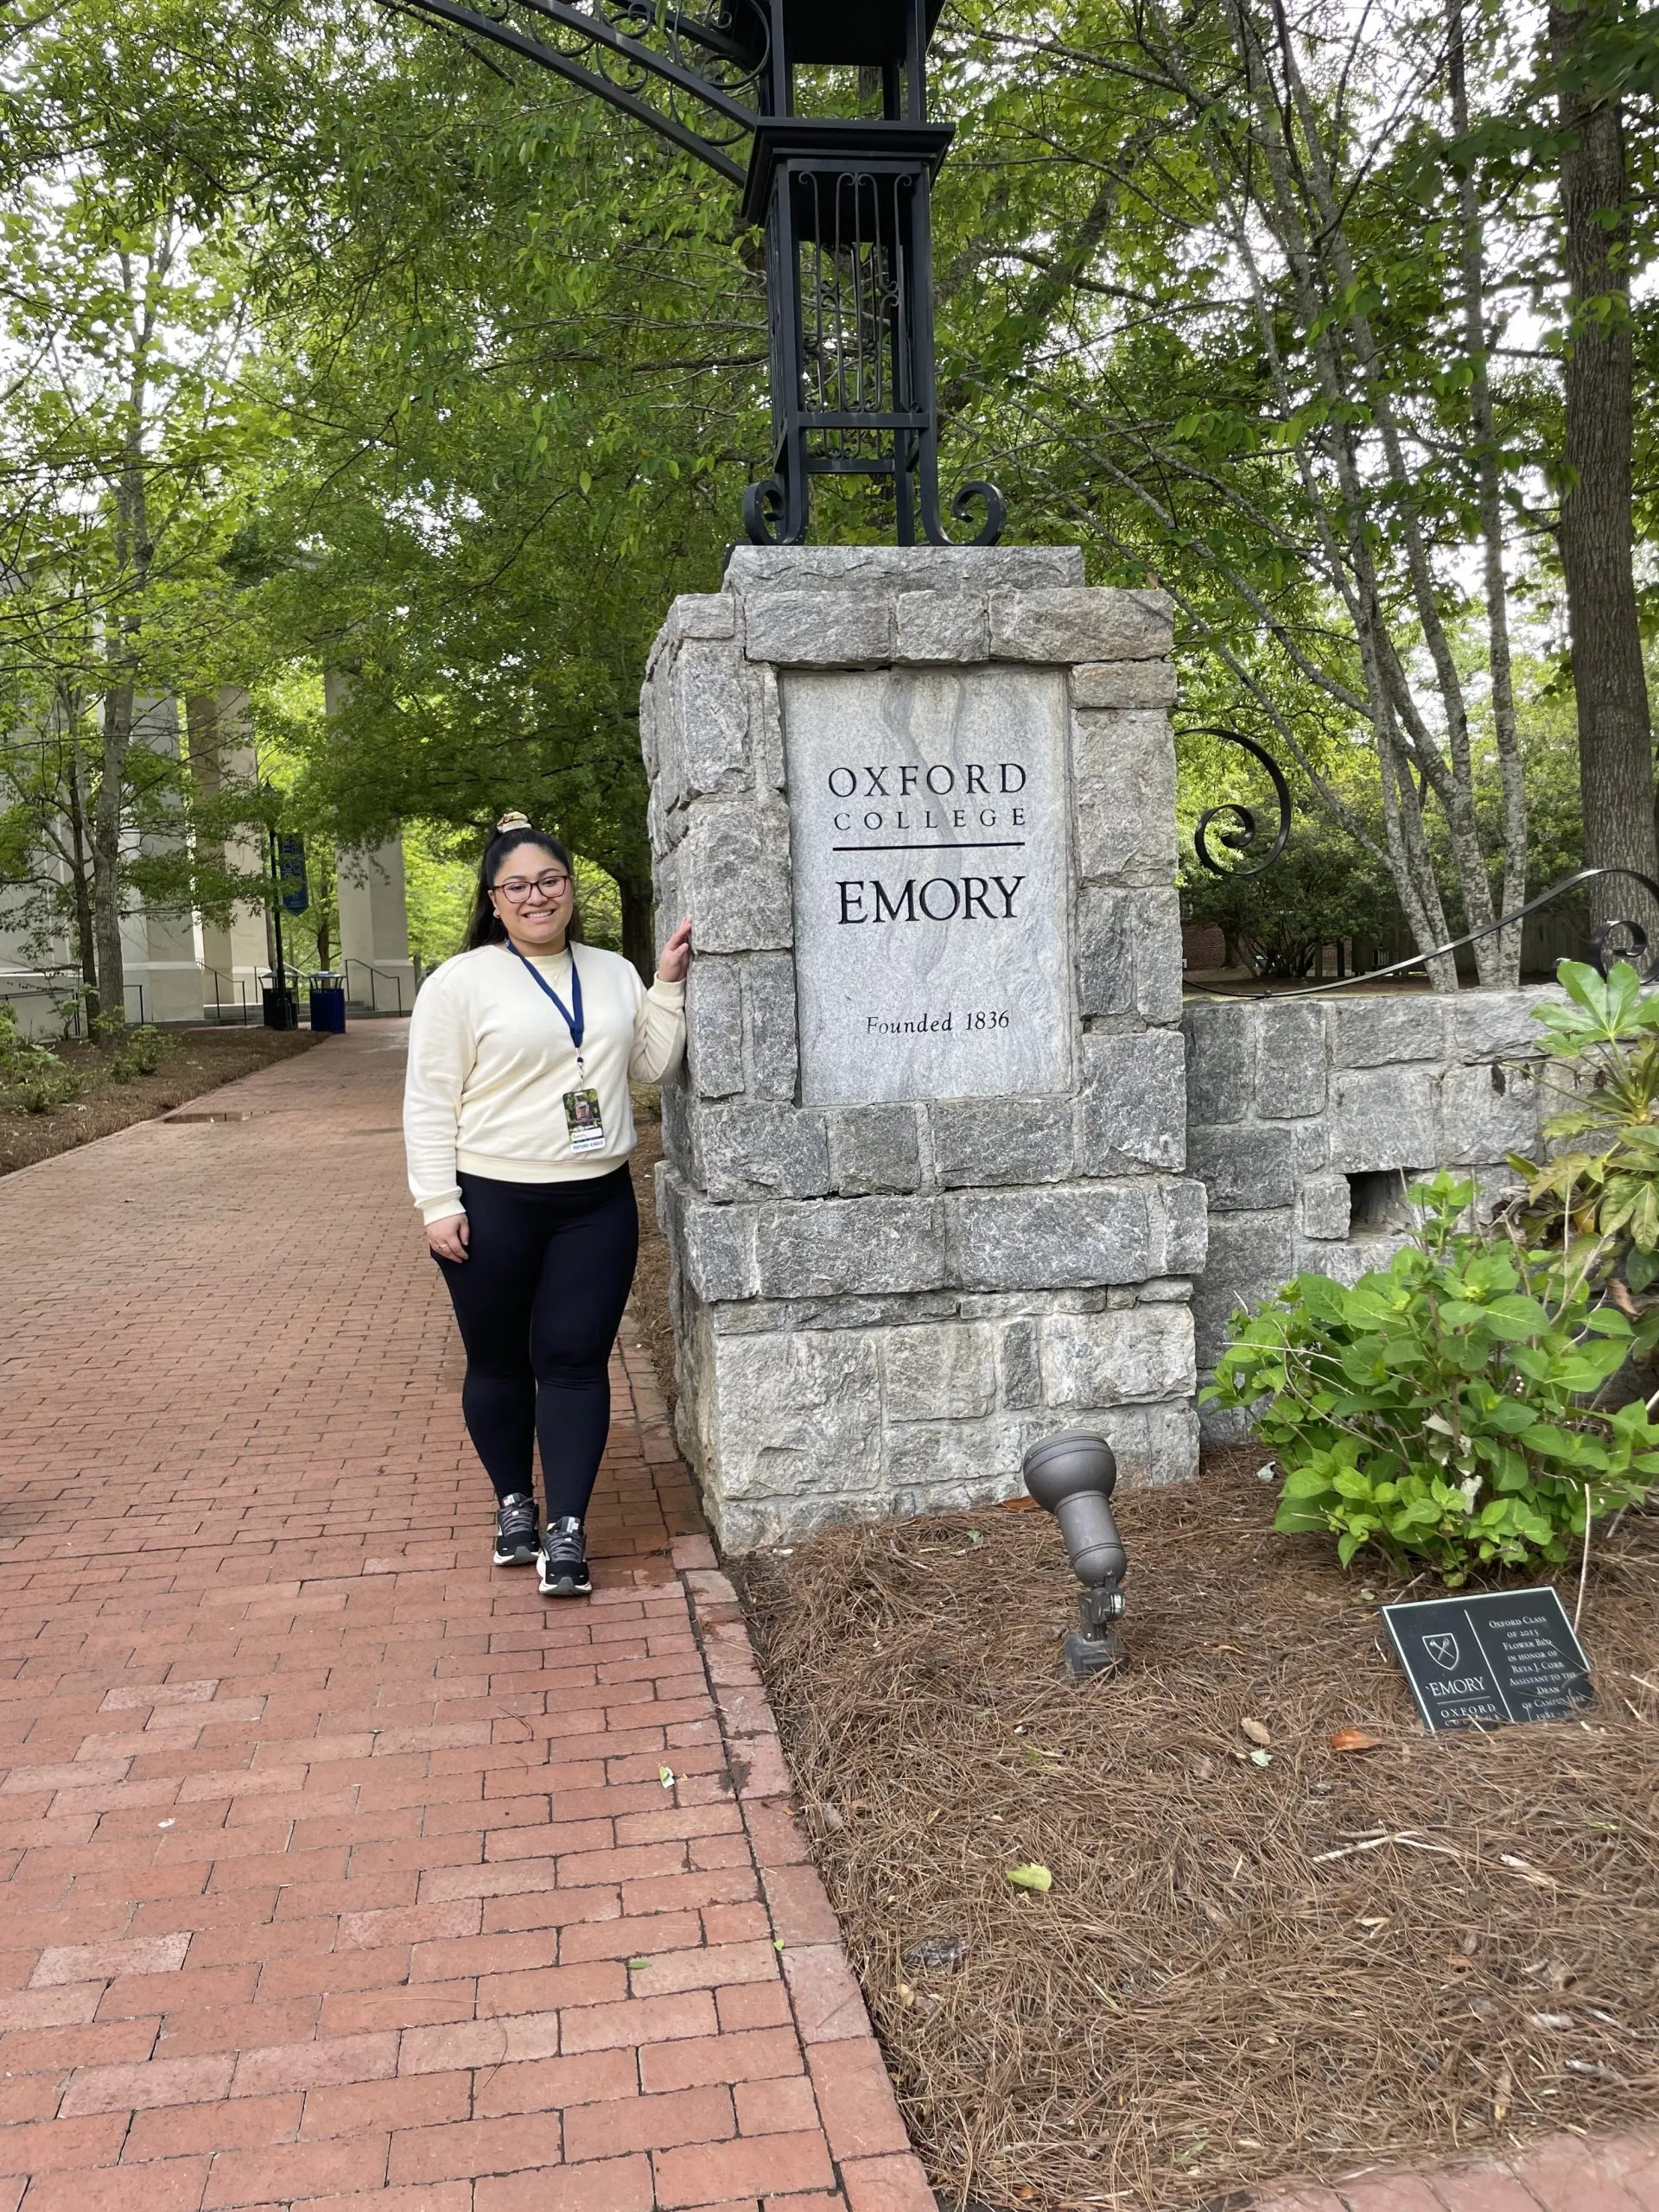 Affirmative action: Young Latino woman with long dark hair in black pants and white sweatshirt stands on red brick path next to stone pillar with Emory school sign with large green trees in the background.